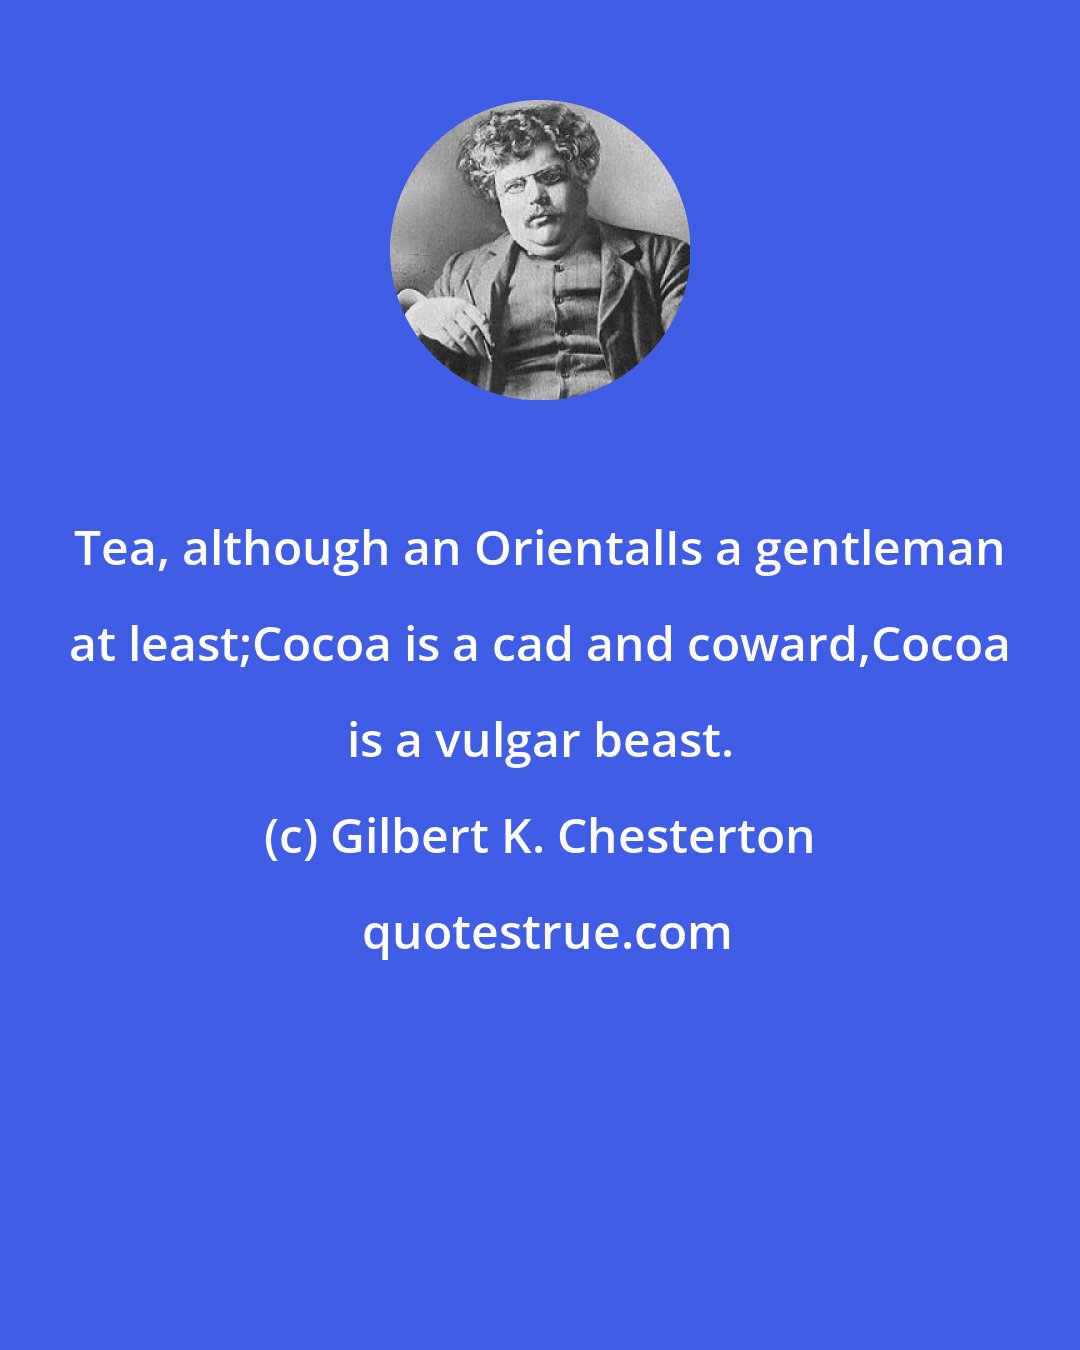 Gilbert K. Chesterton: Tea, although an OrientalIs a gentleman at least;Cocoa is a cad and coward,Cocoa is a vulgar beast.